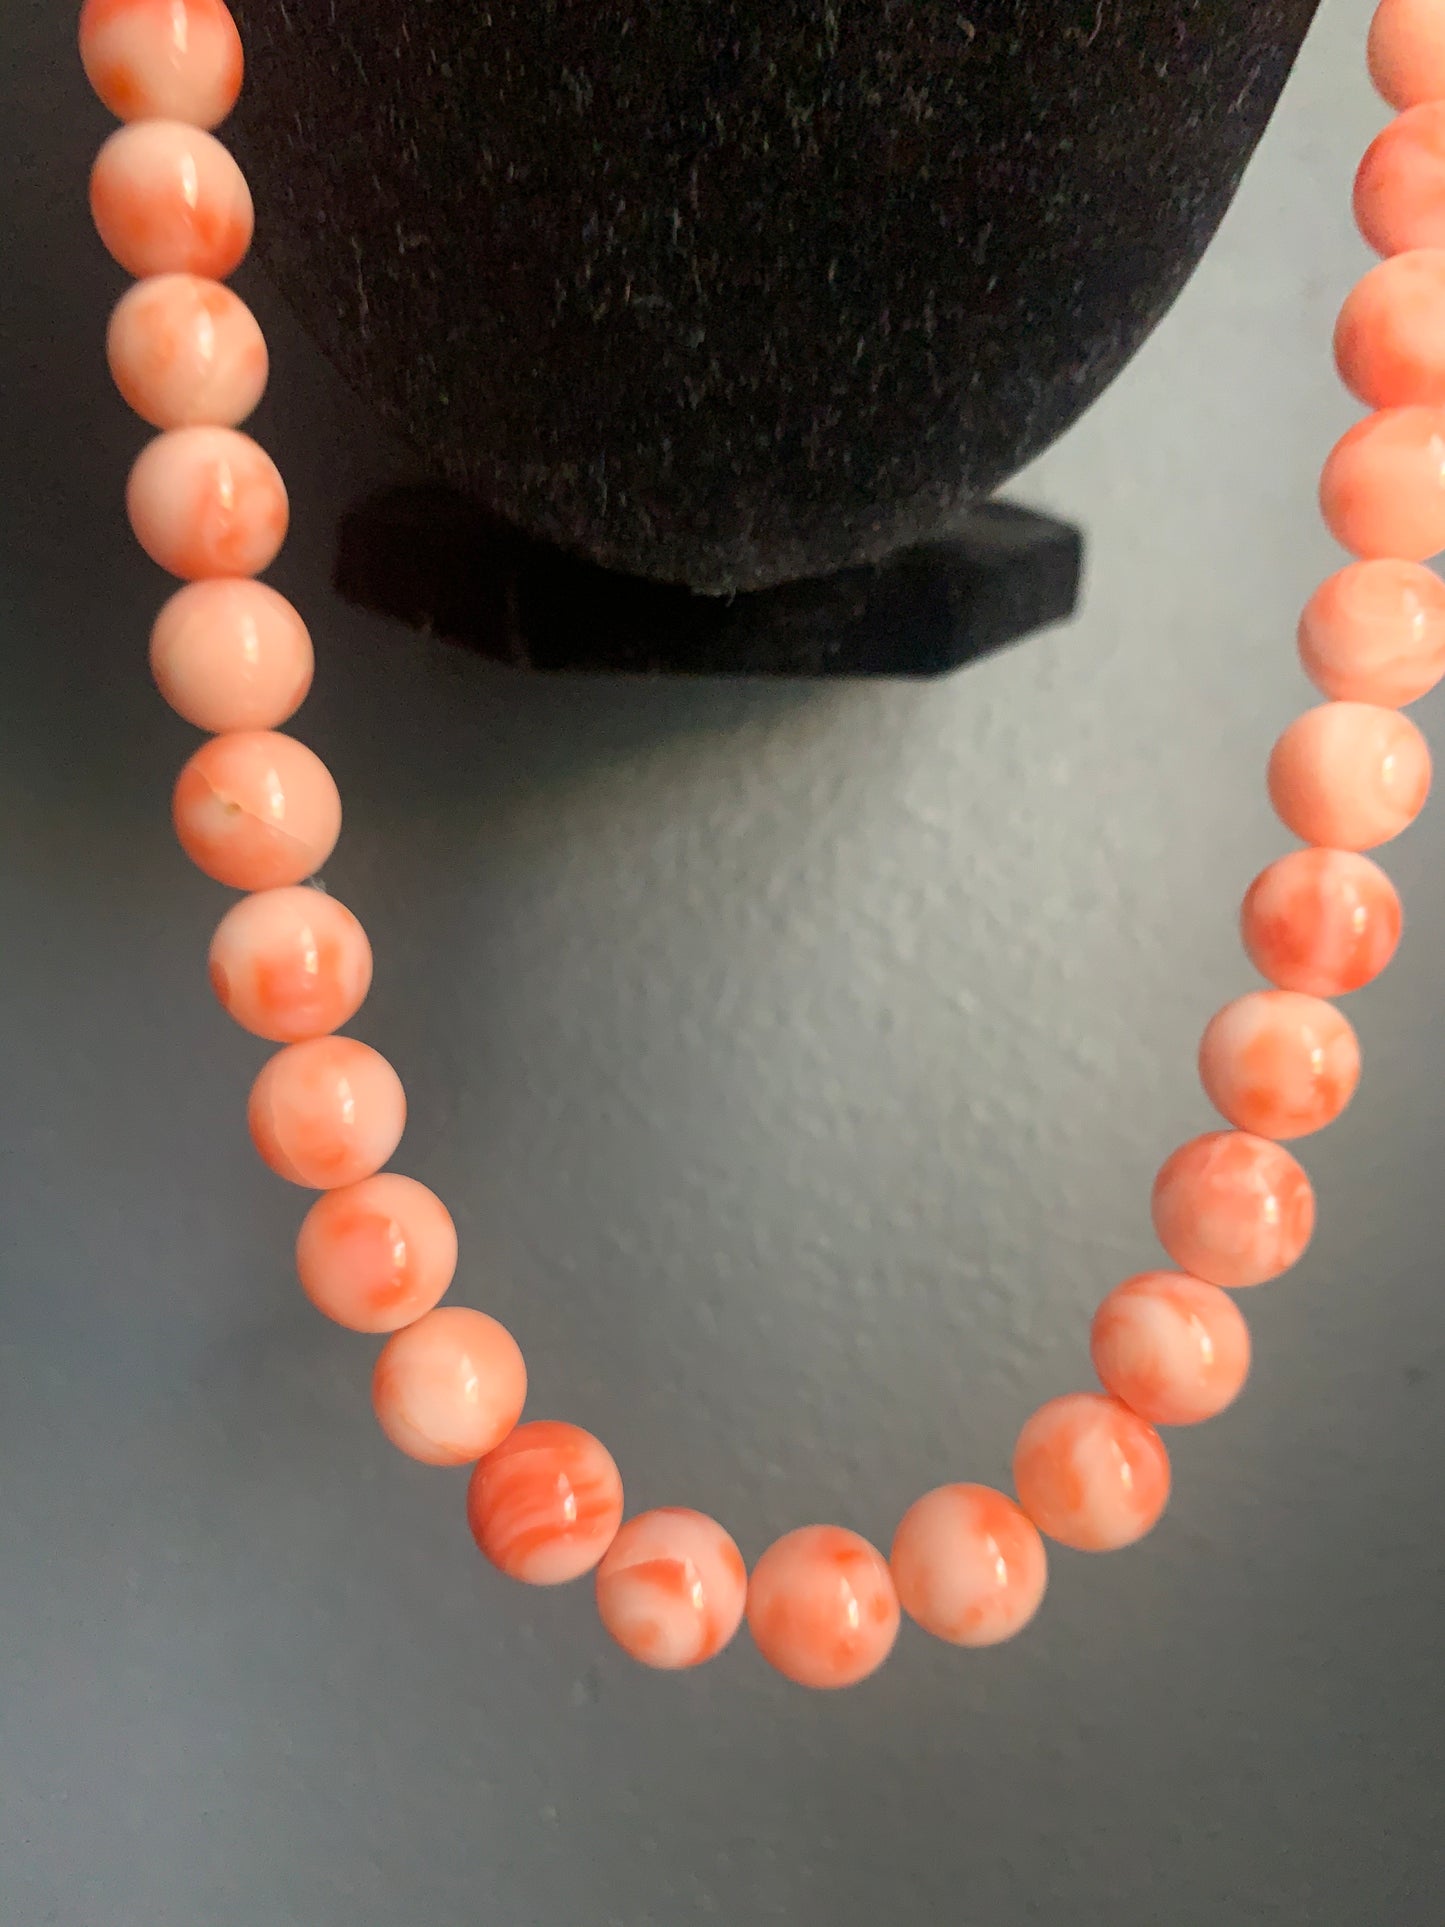 A salmon colored coral -like bead necklace